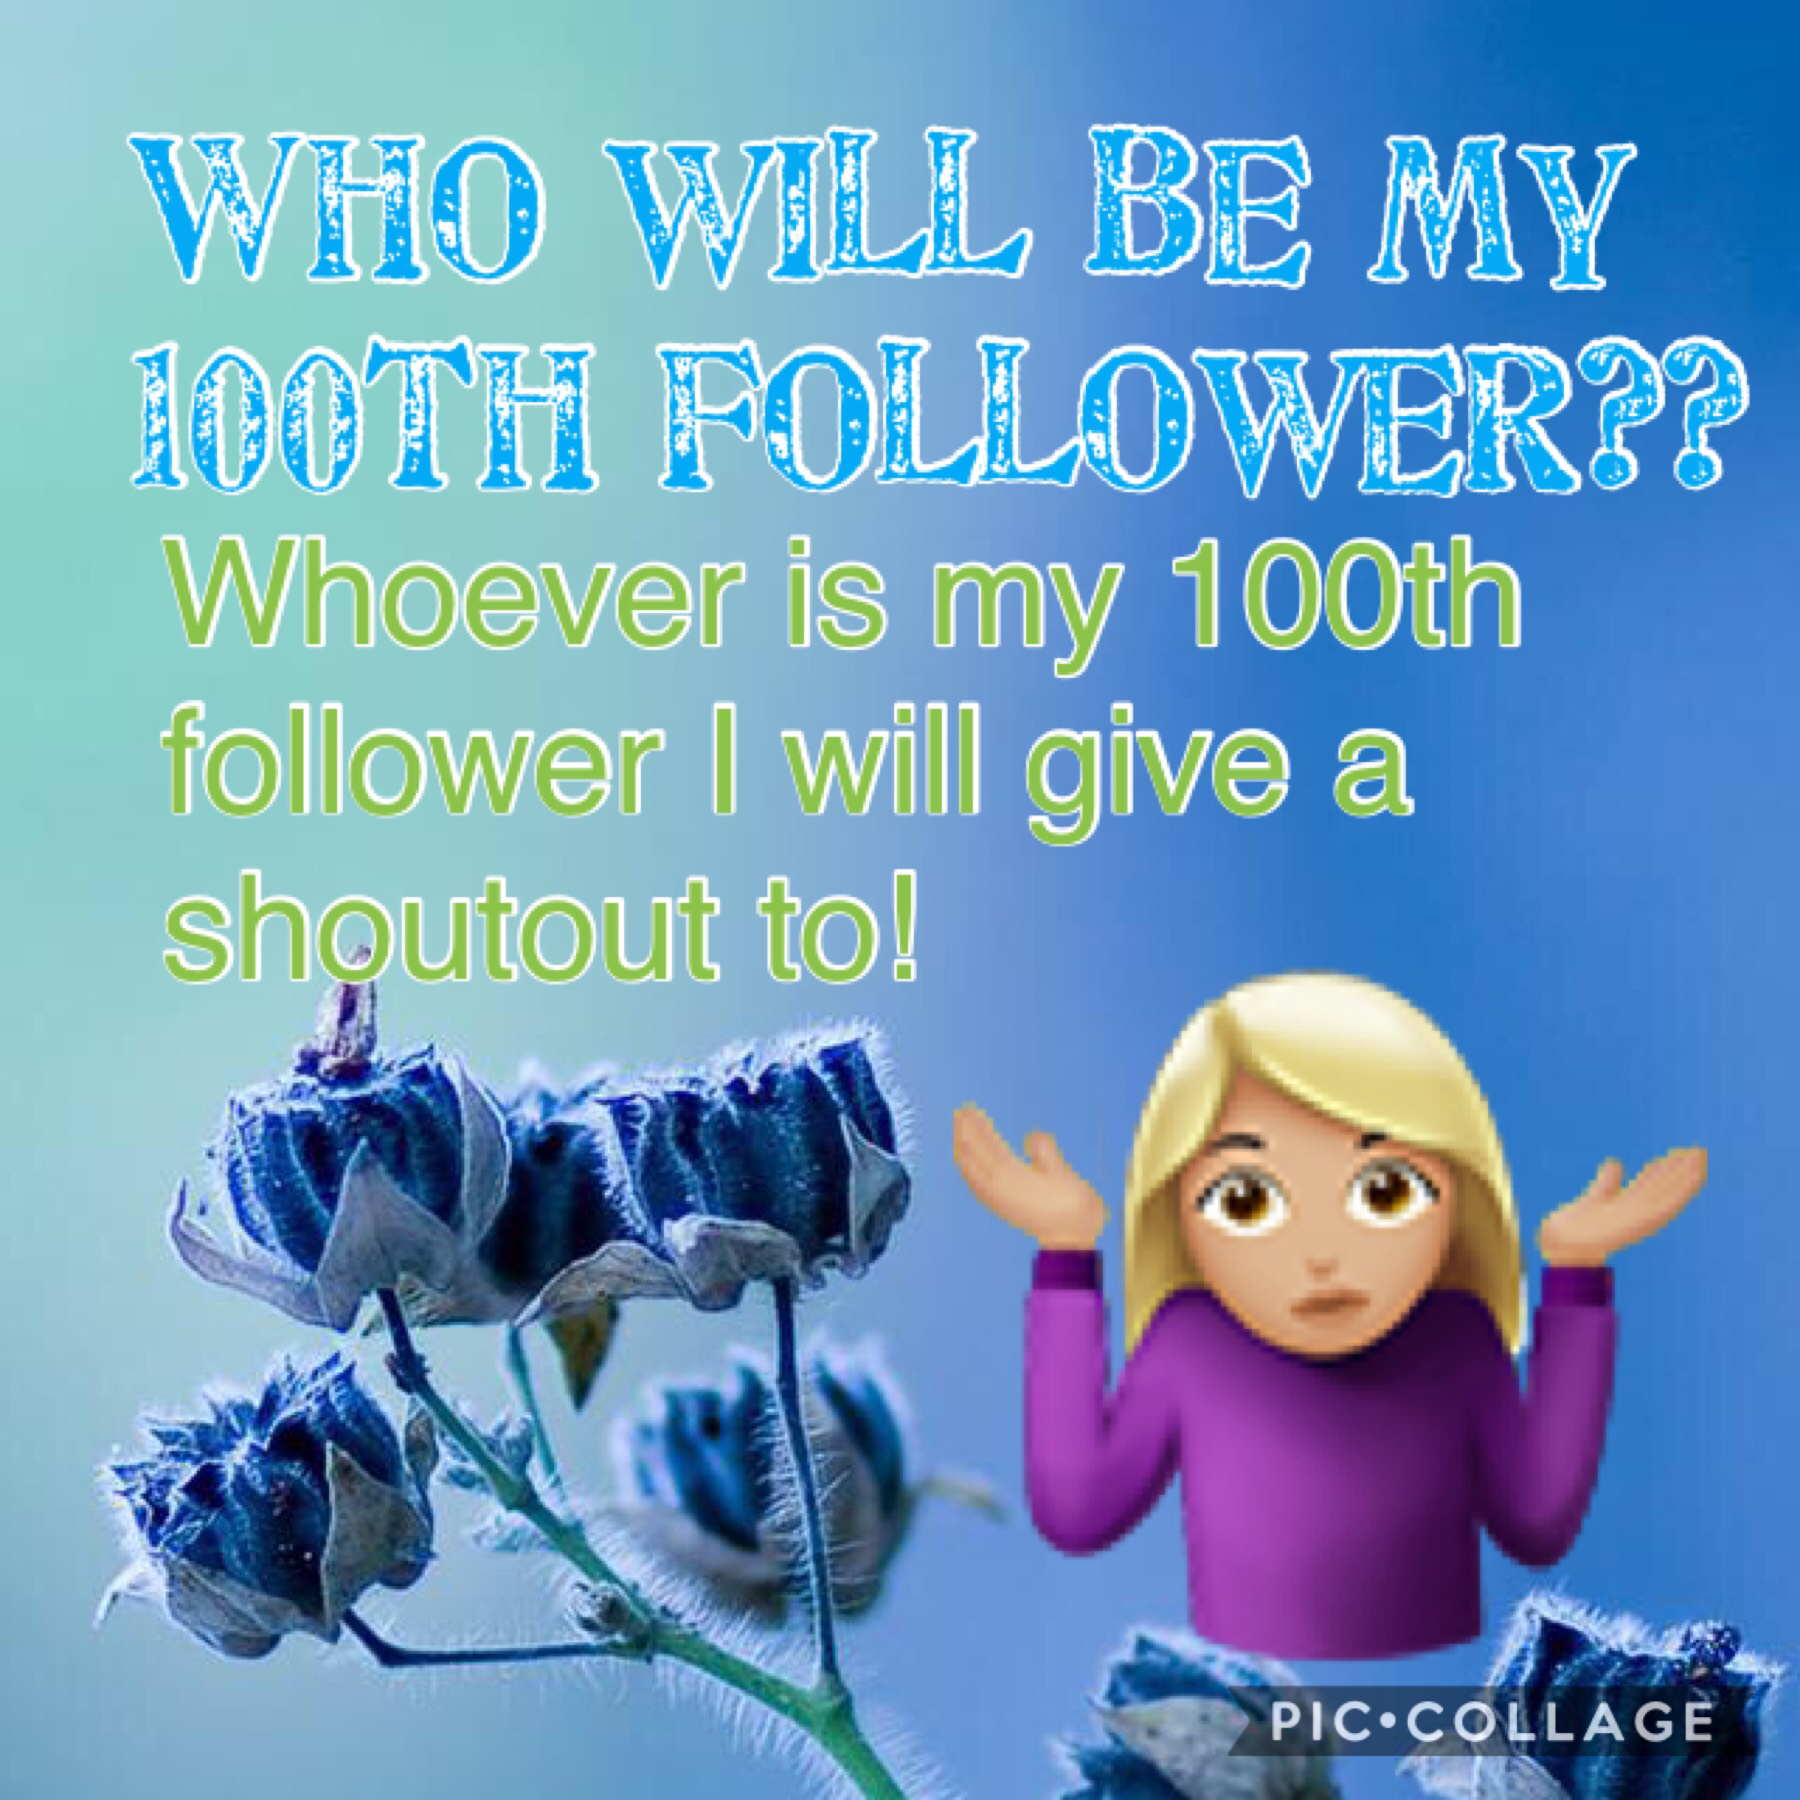 Will you be my 100th follower?? Hmm... 🤔 or will you?? 🤷🏼‍♀️🤷🏼‍♀️